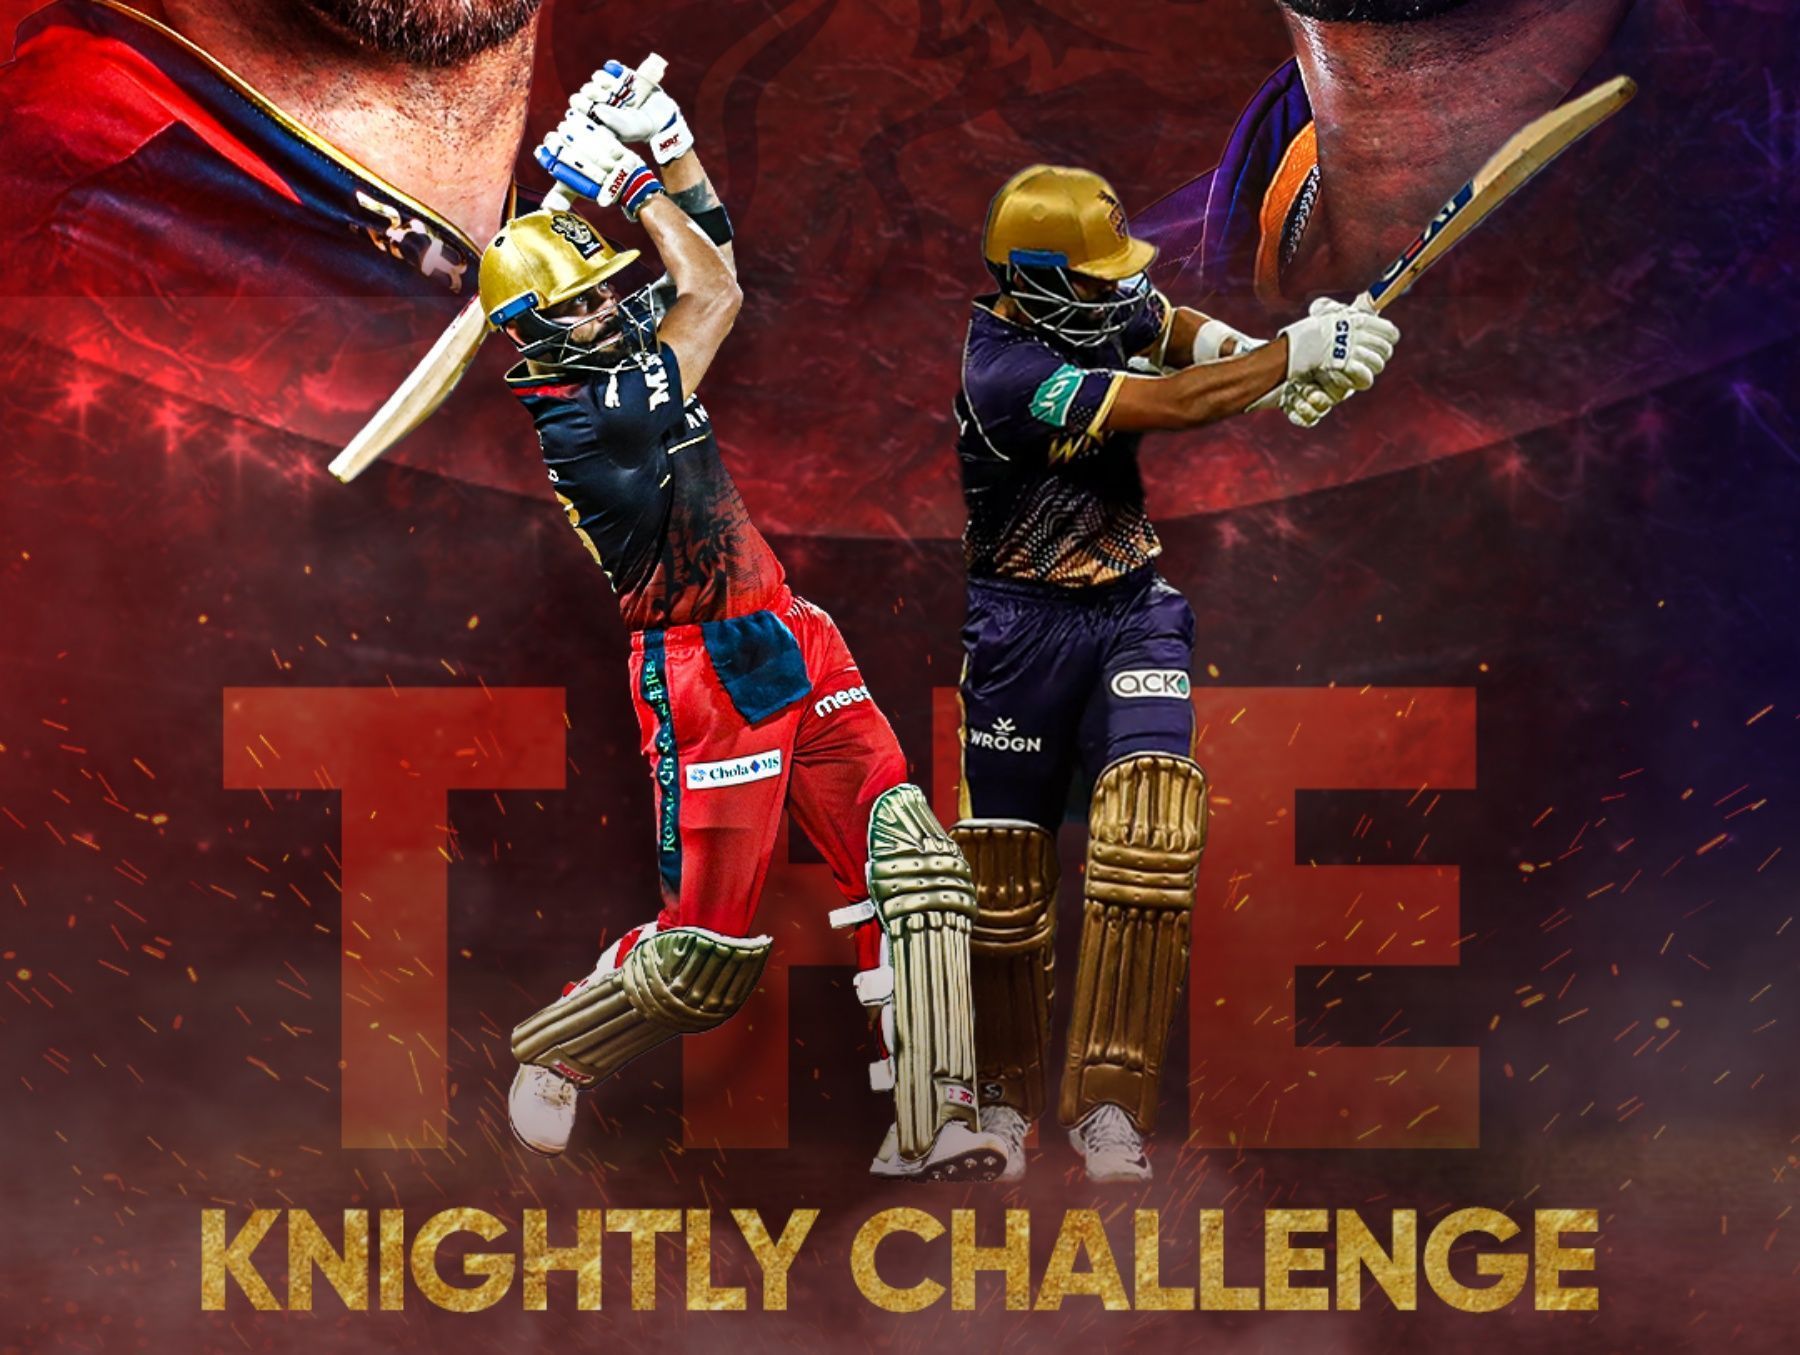 Can Bangalore get off the mark against Kolkata? Pic: RCB/ Twitter